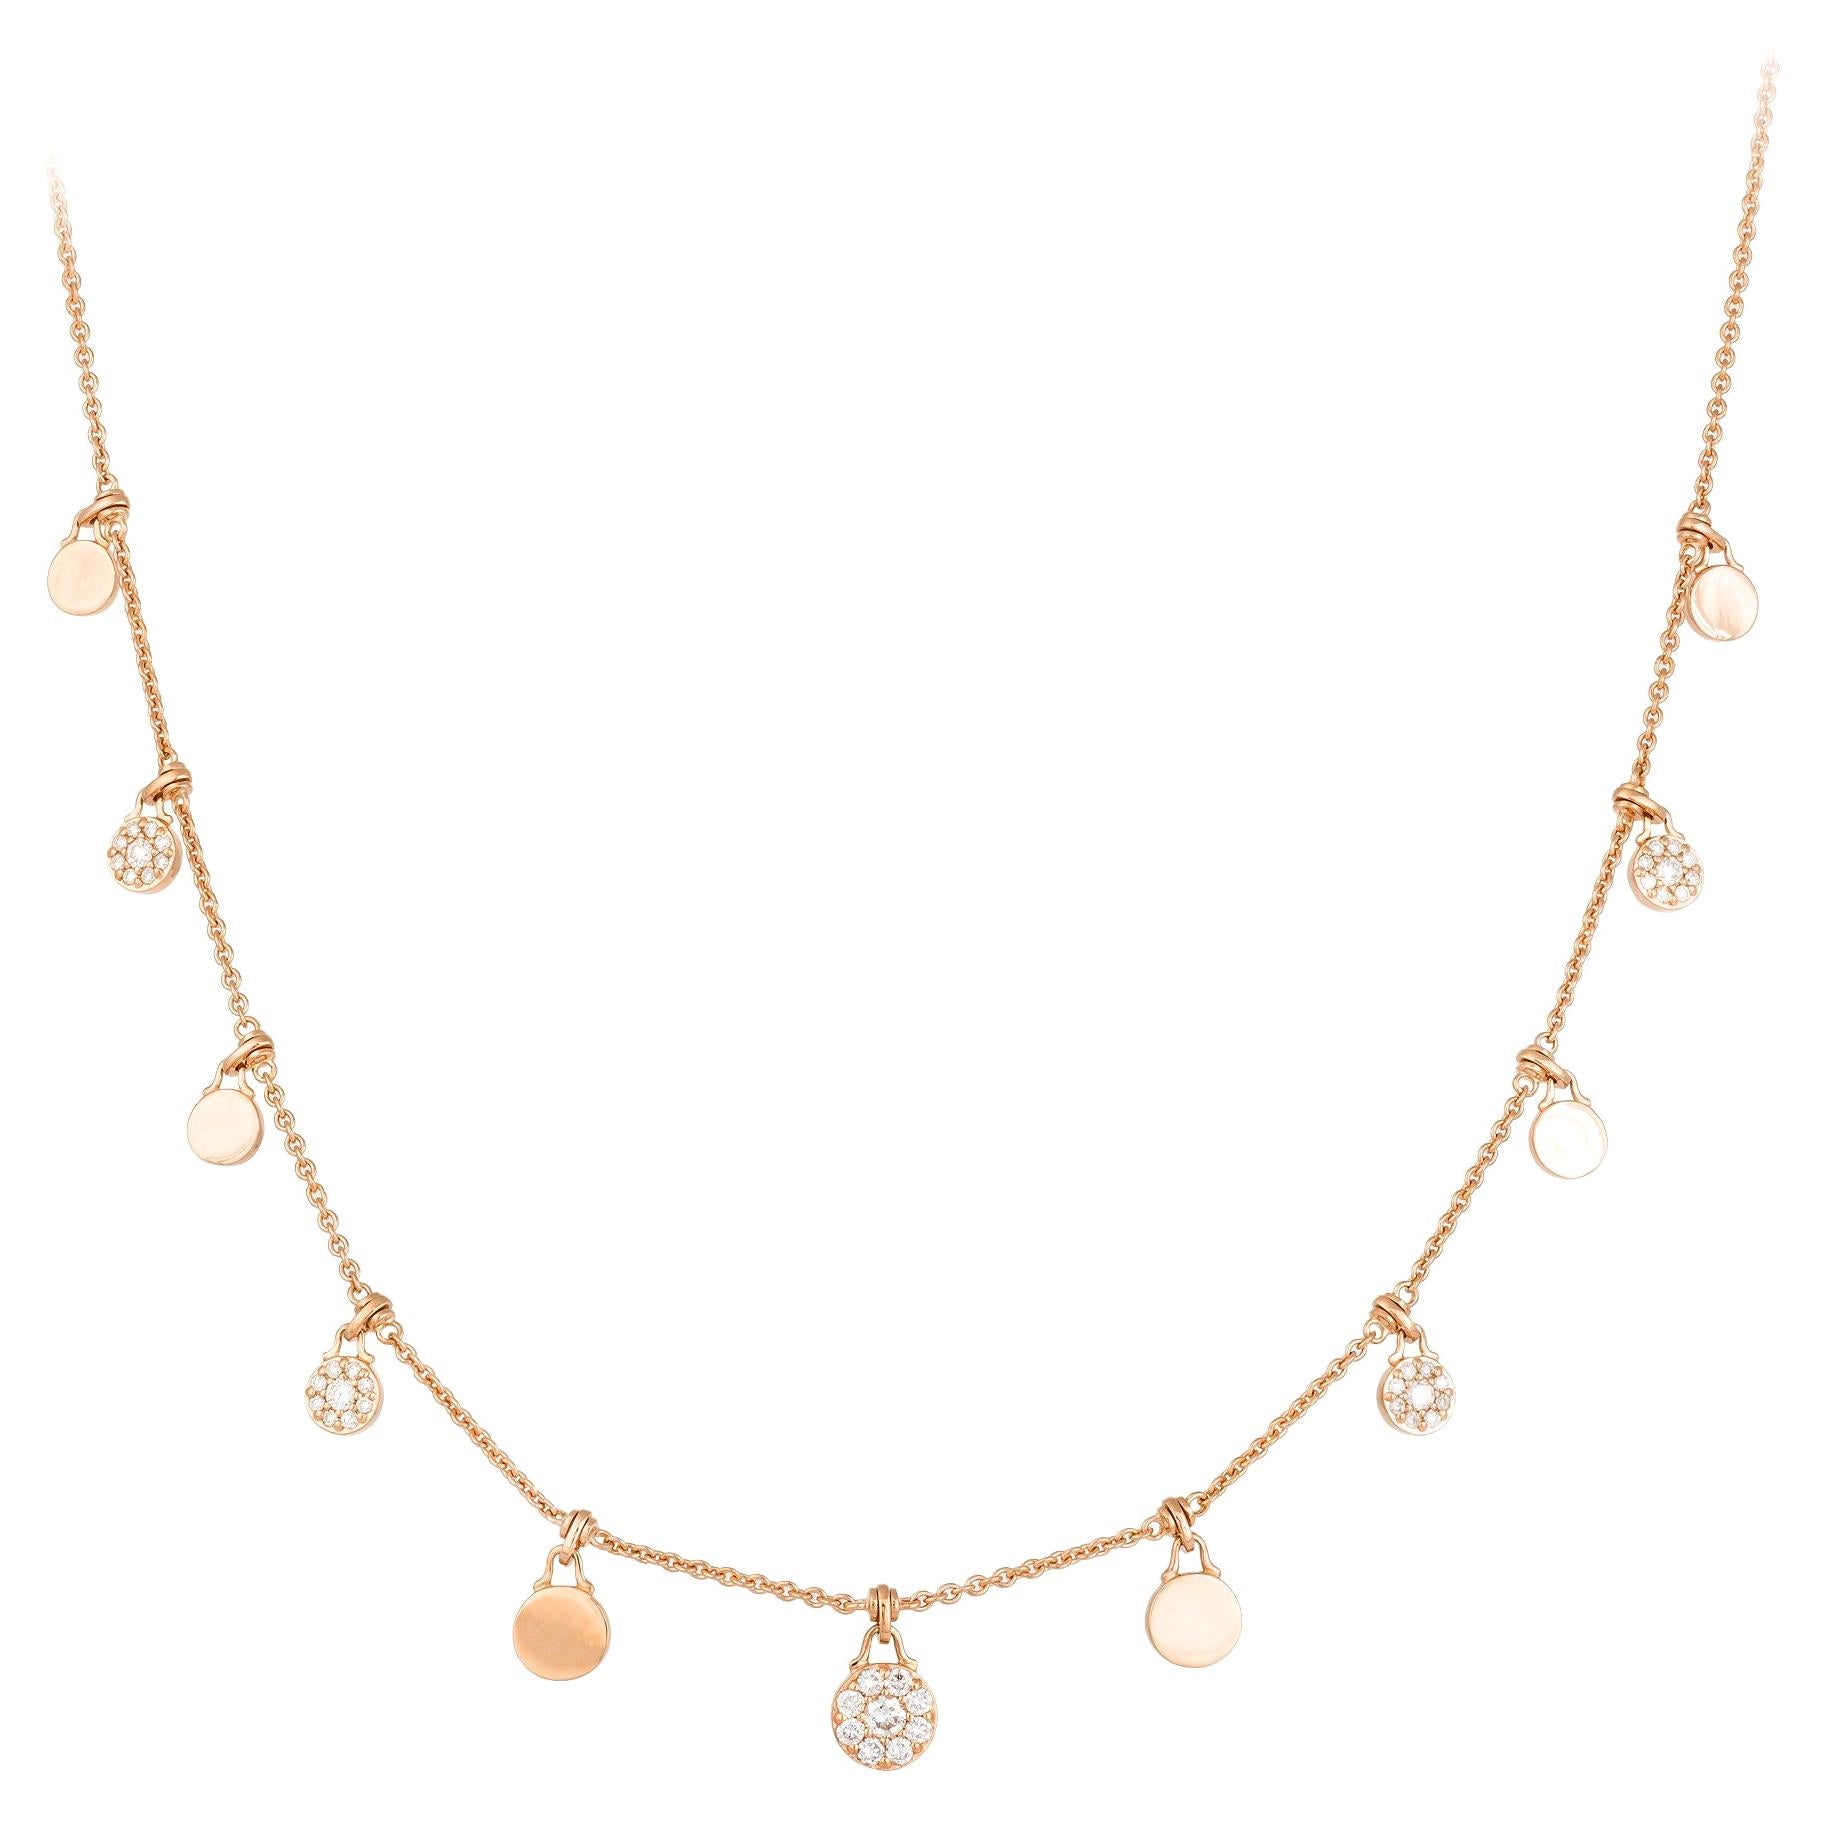 Impressive 18k Diamonds Yellow Gold Necklace for Her